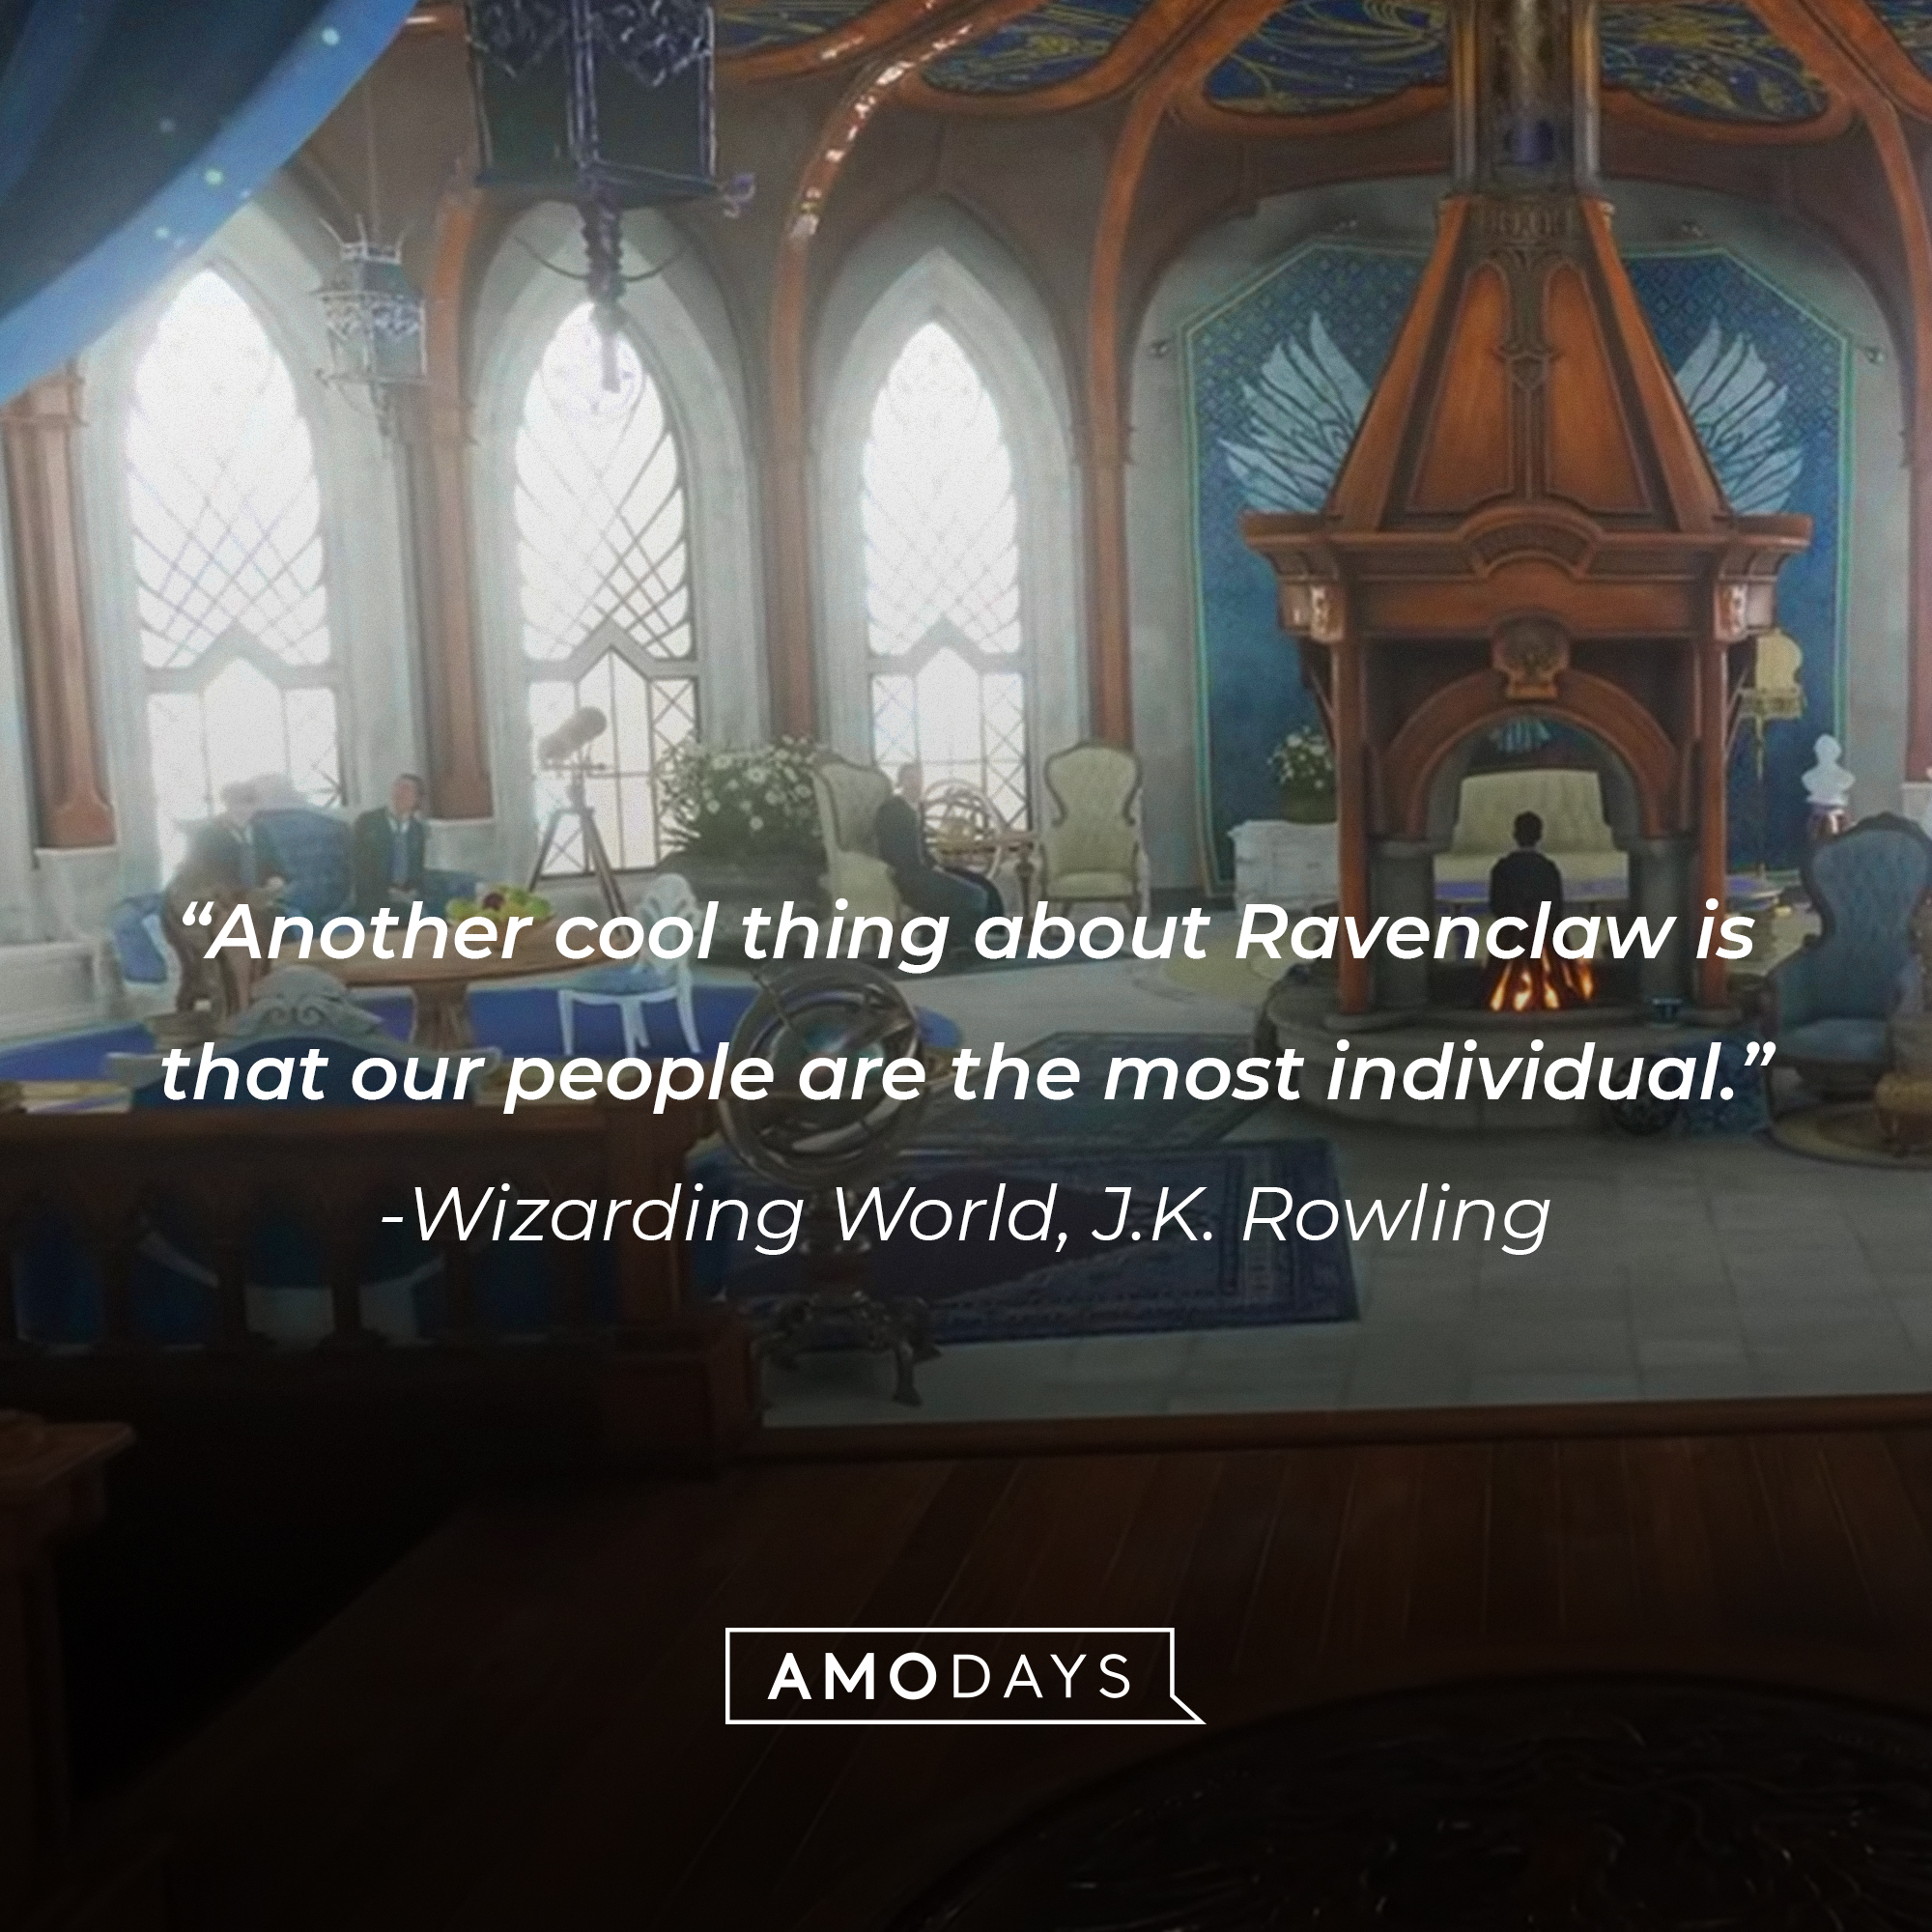 J.K. Rowling’s quote from Wizarding World: “Another cool thing about Ravenclaw is that our people are the most individual.” | Source: youtube.com/HogwartsLegacy